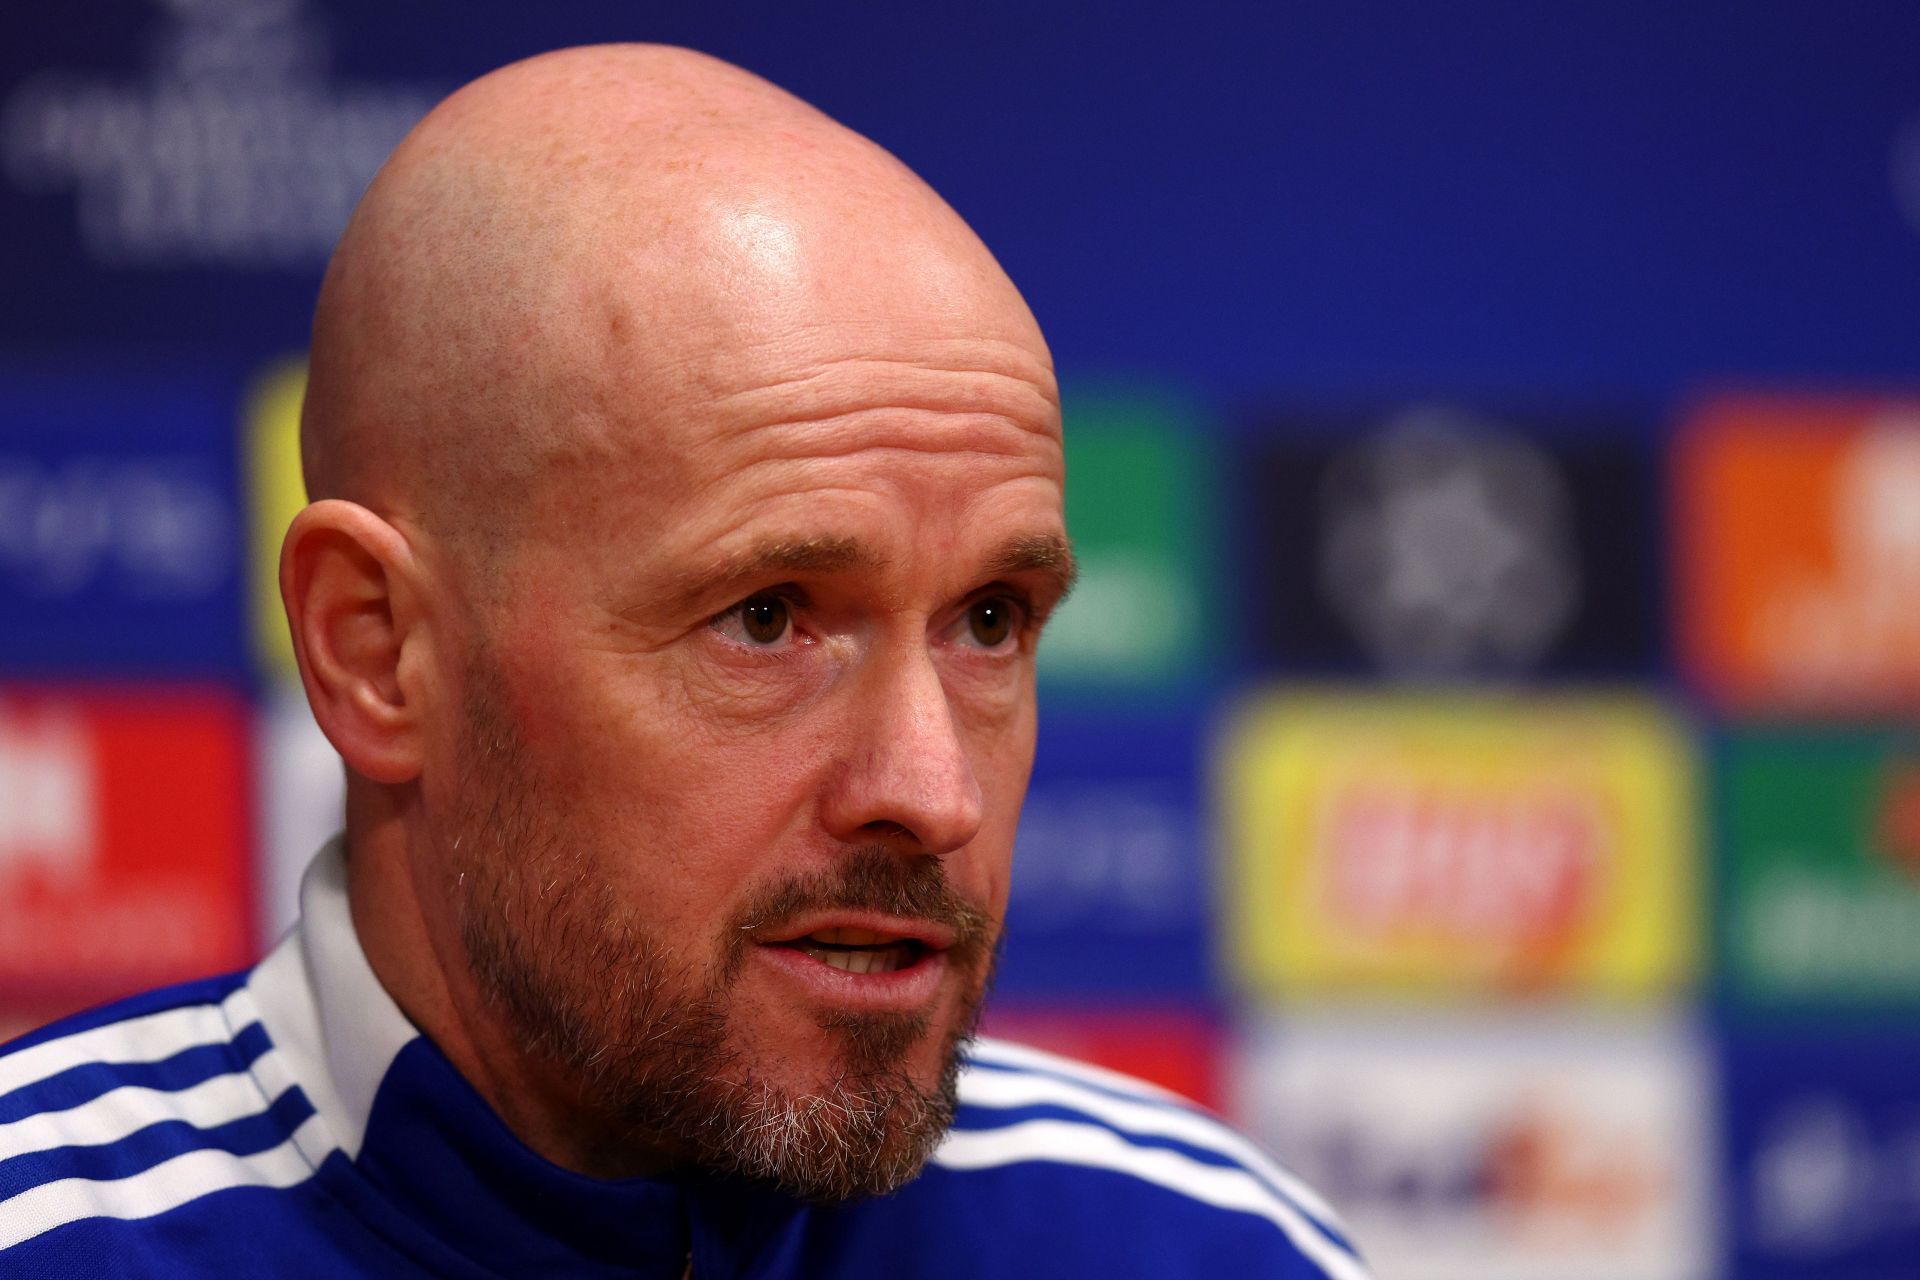 Erik ten Hag could arrive at Old Trafford this summer.